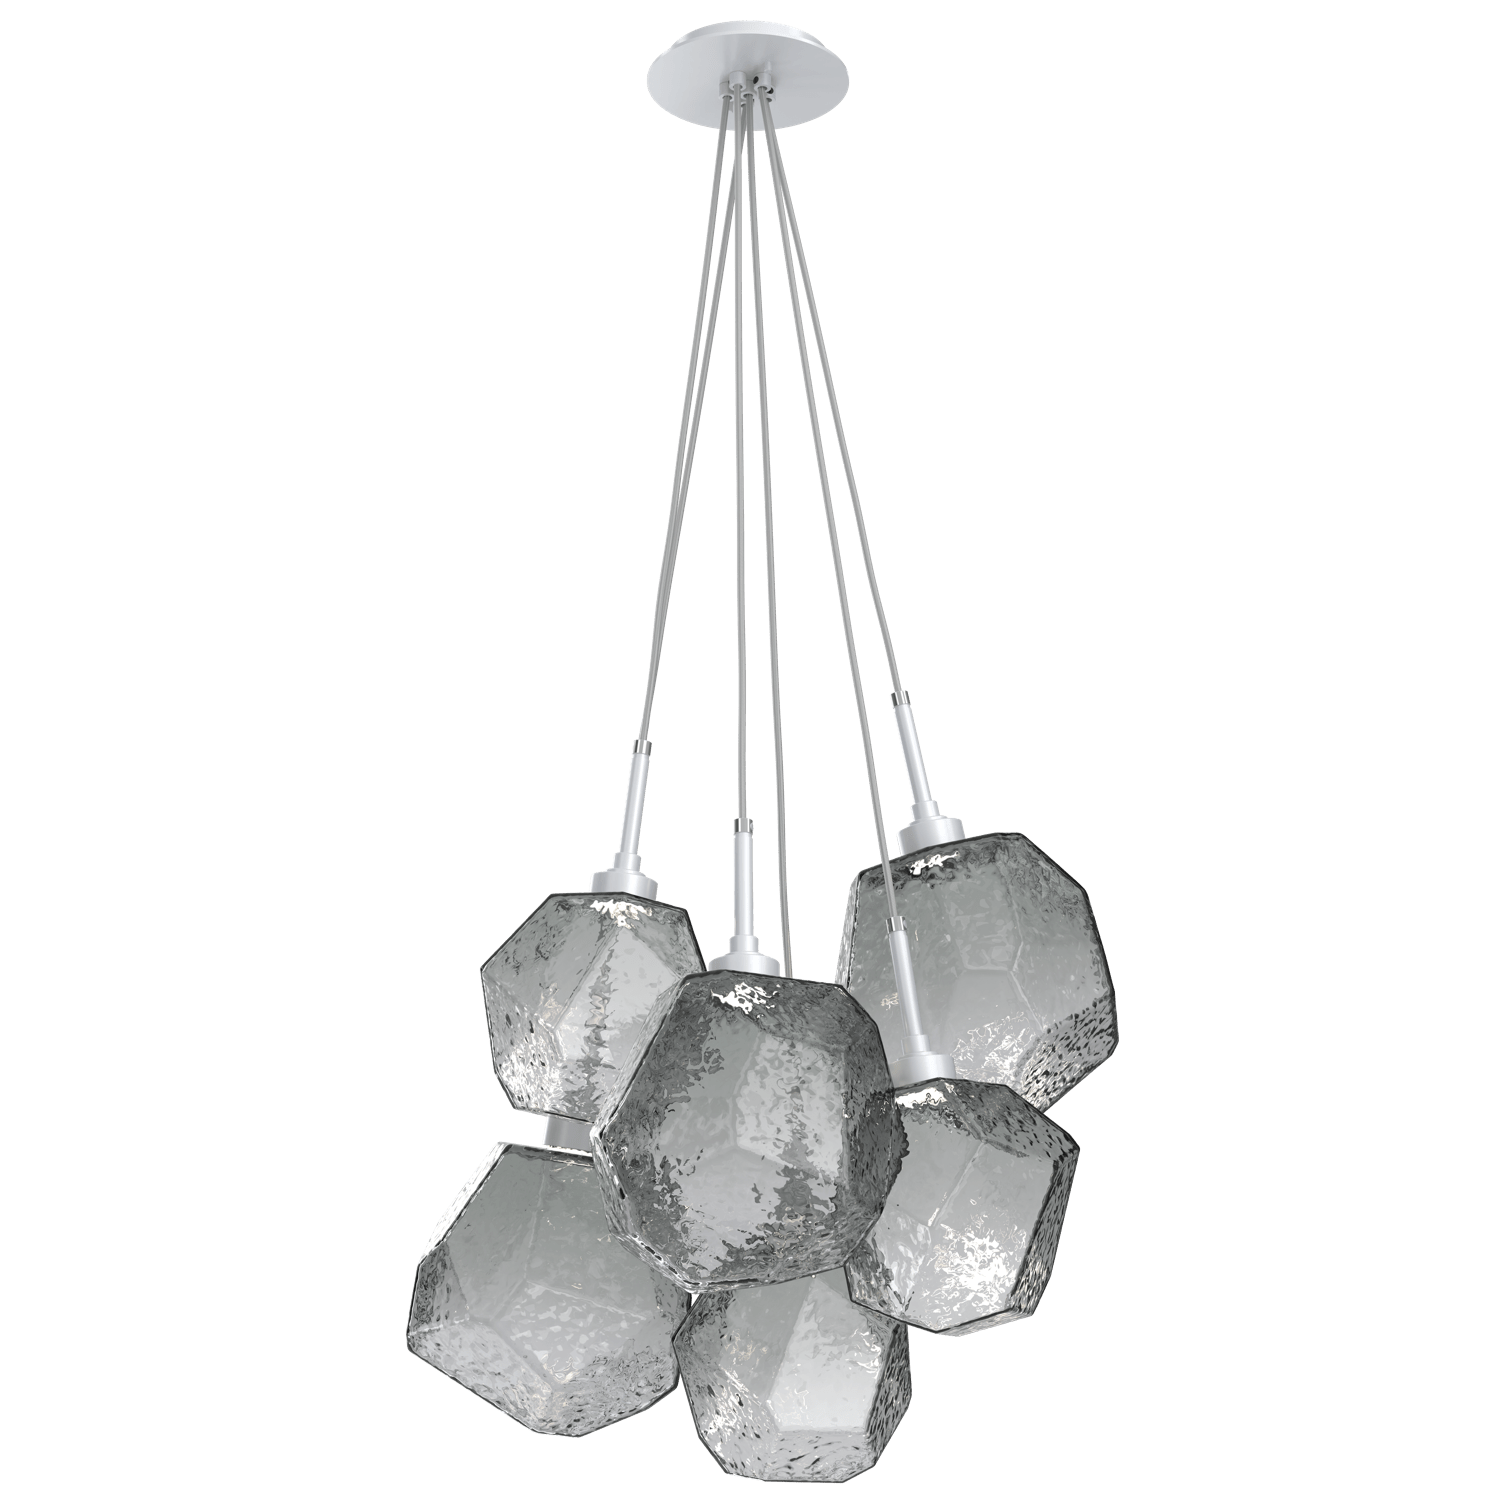 CHB0039-0F-CS-S-Hammerton-Studio-Gem-6-light-cluster-pendant-light-with-classic-silver-finish-and-smoke-blown-glass-shades-and-LED-lamping